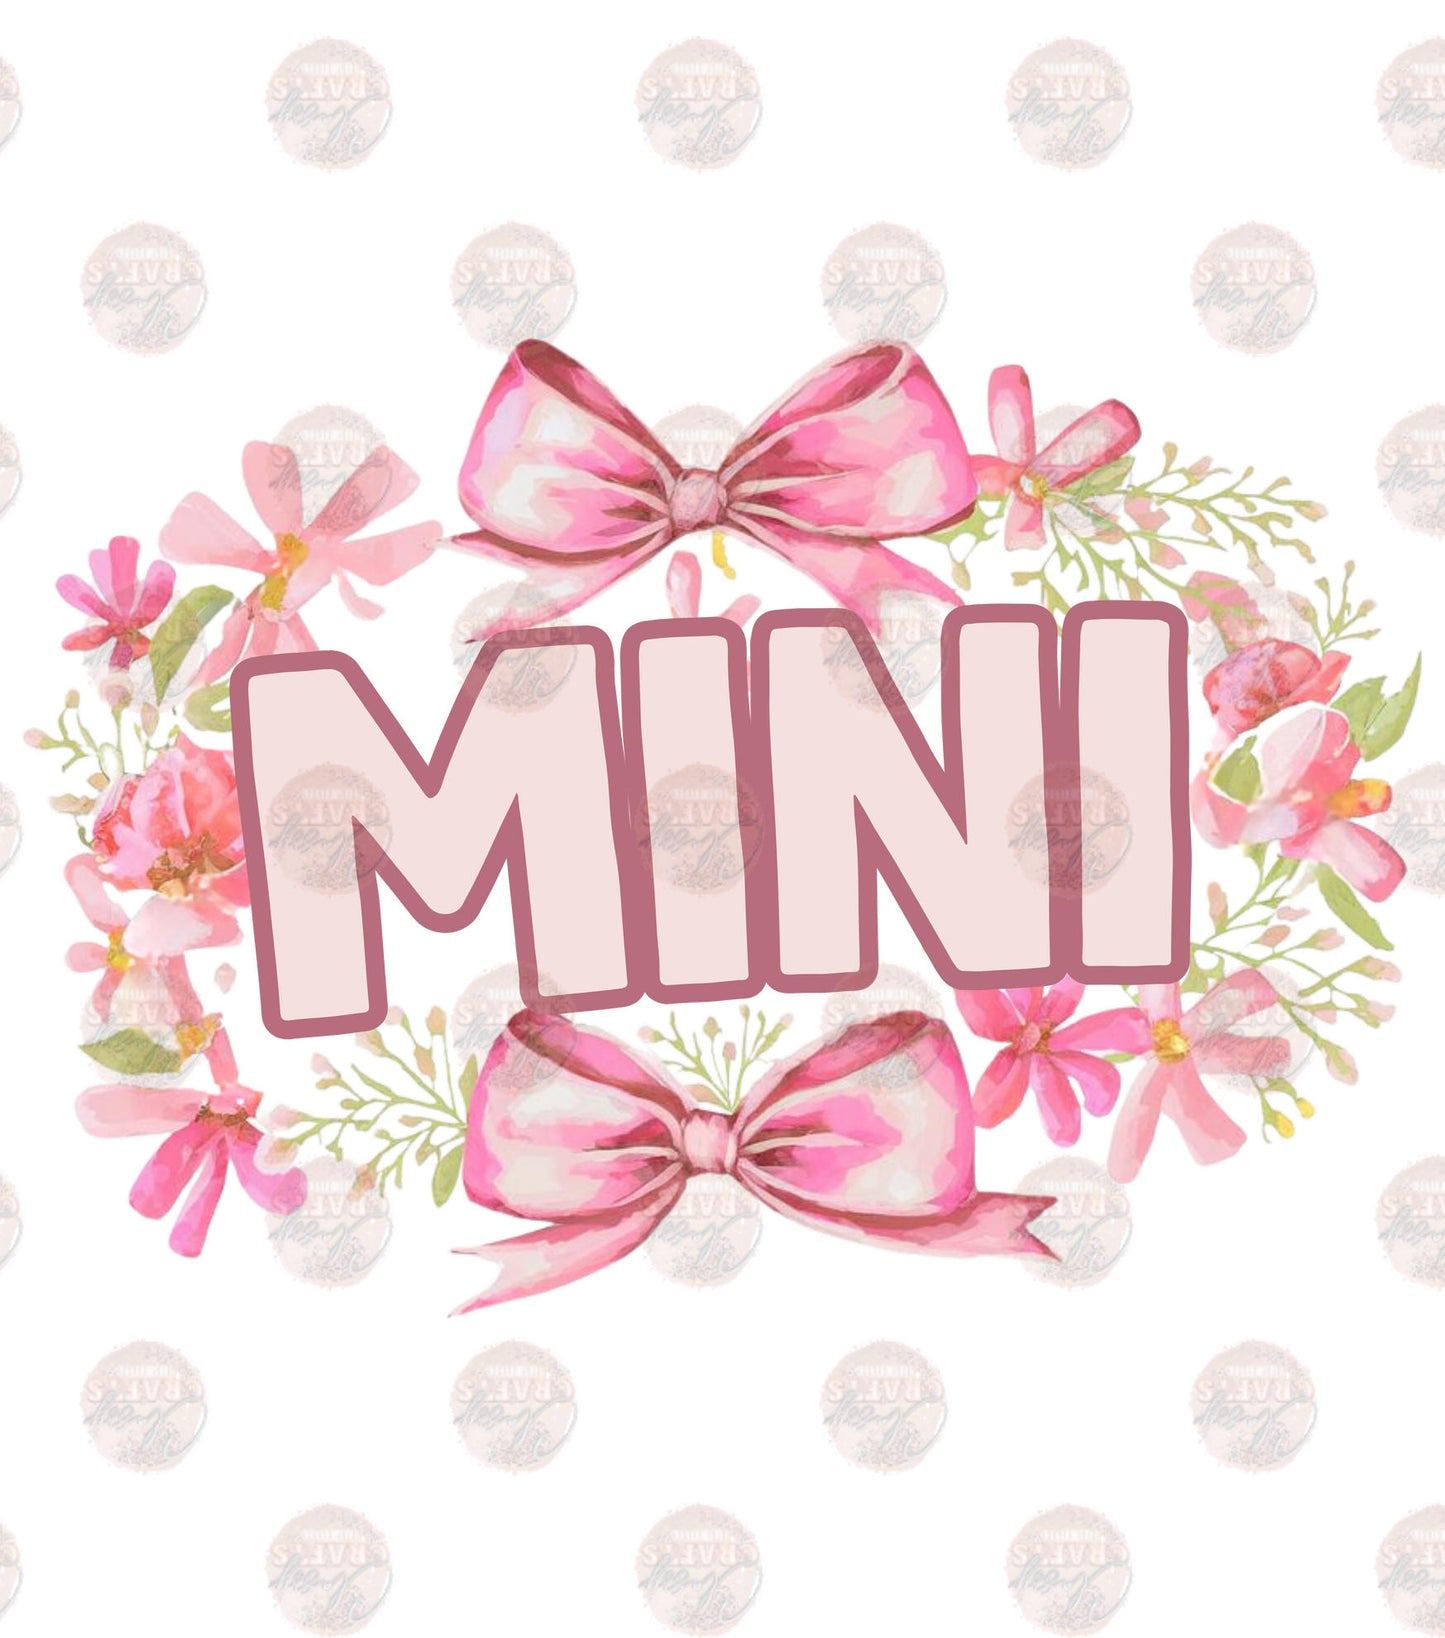 Mama and Mini Block Letters with Bows Transfer